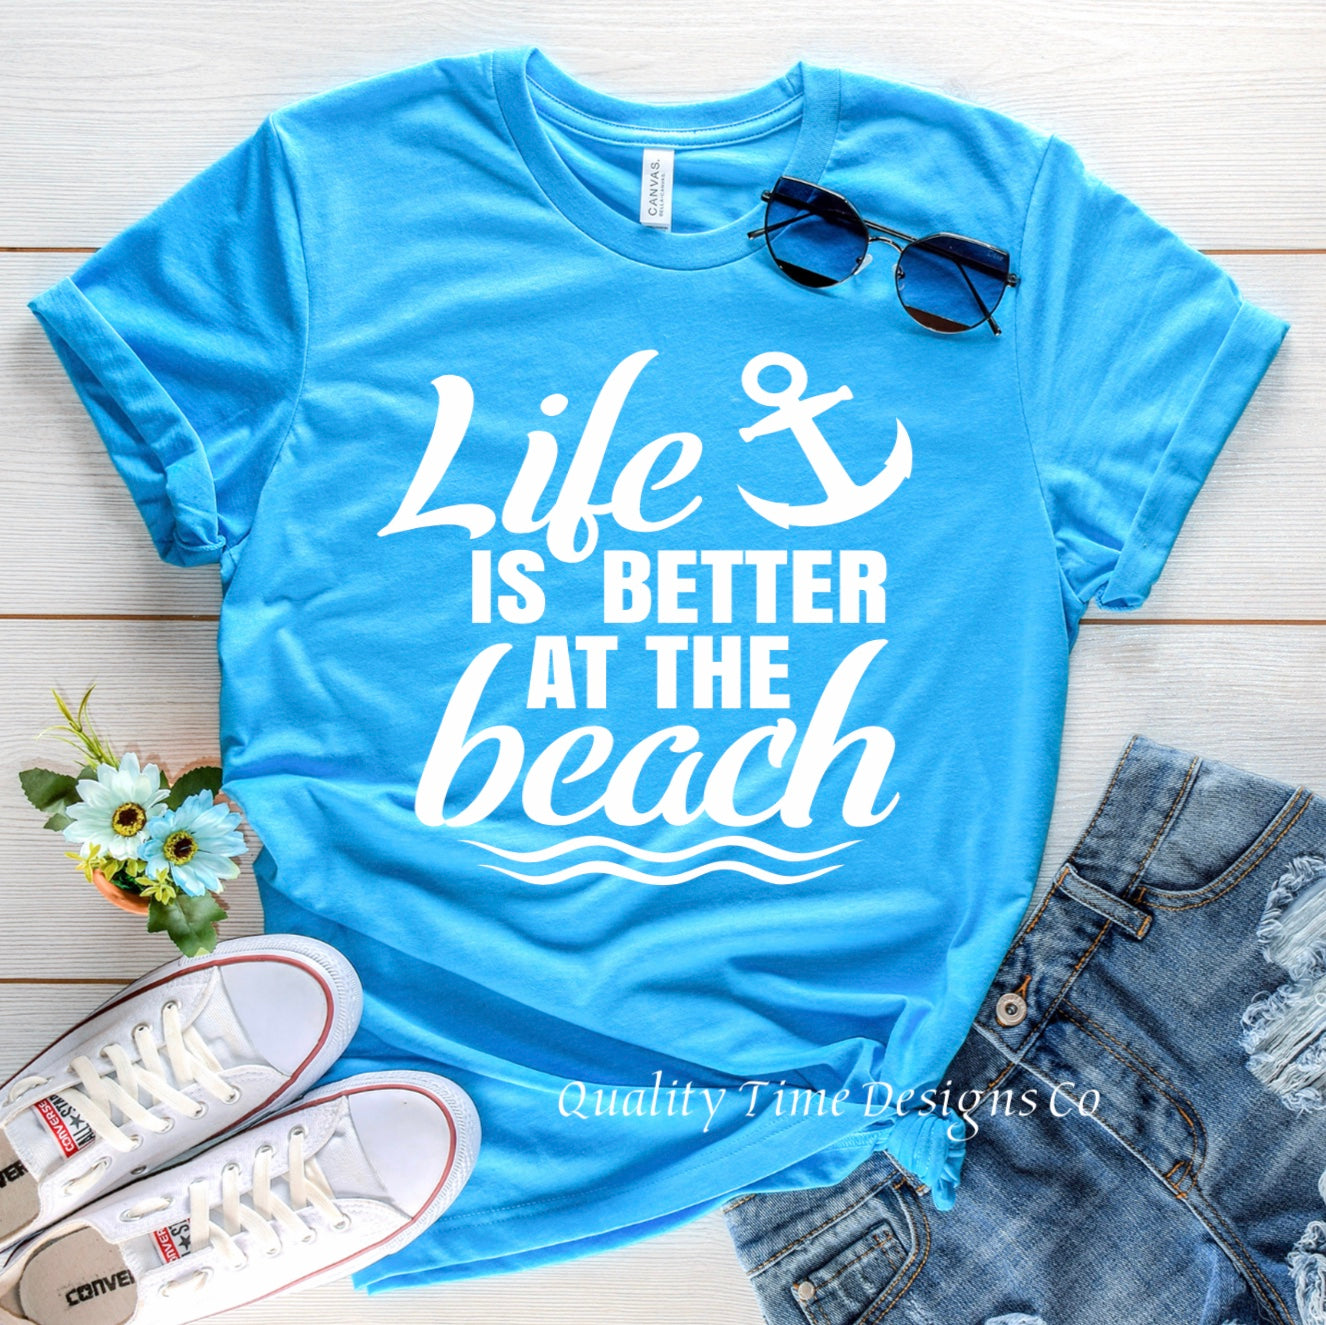 Life is better at the beach t-shirt 